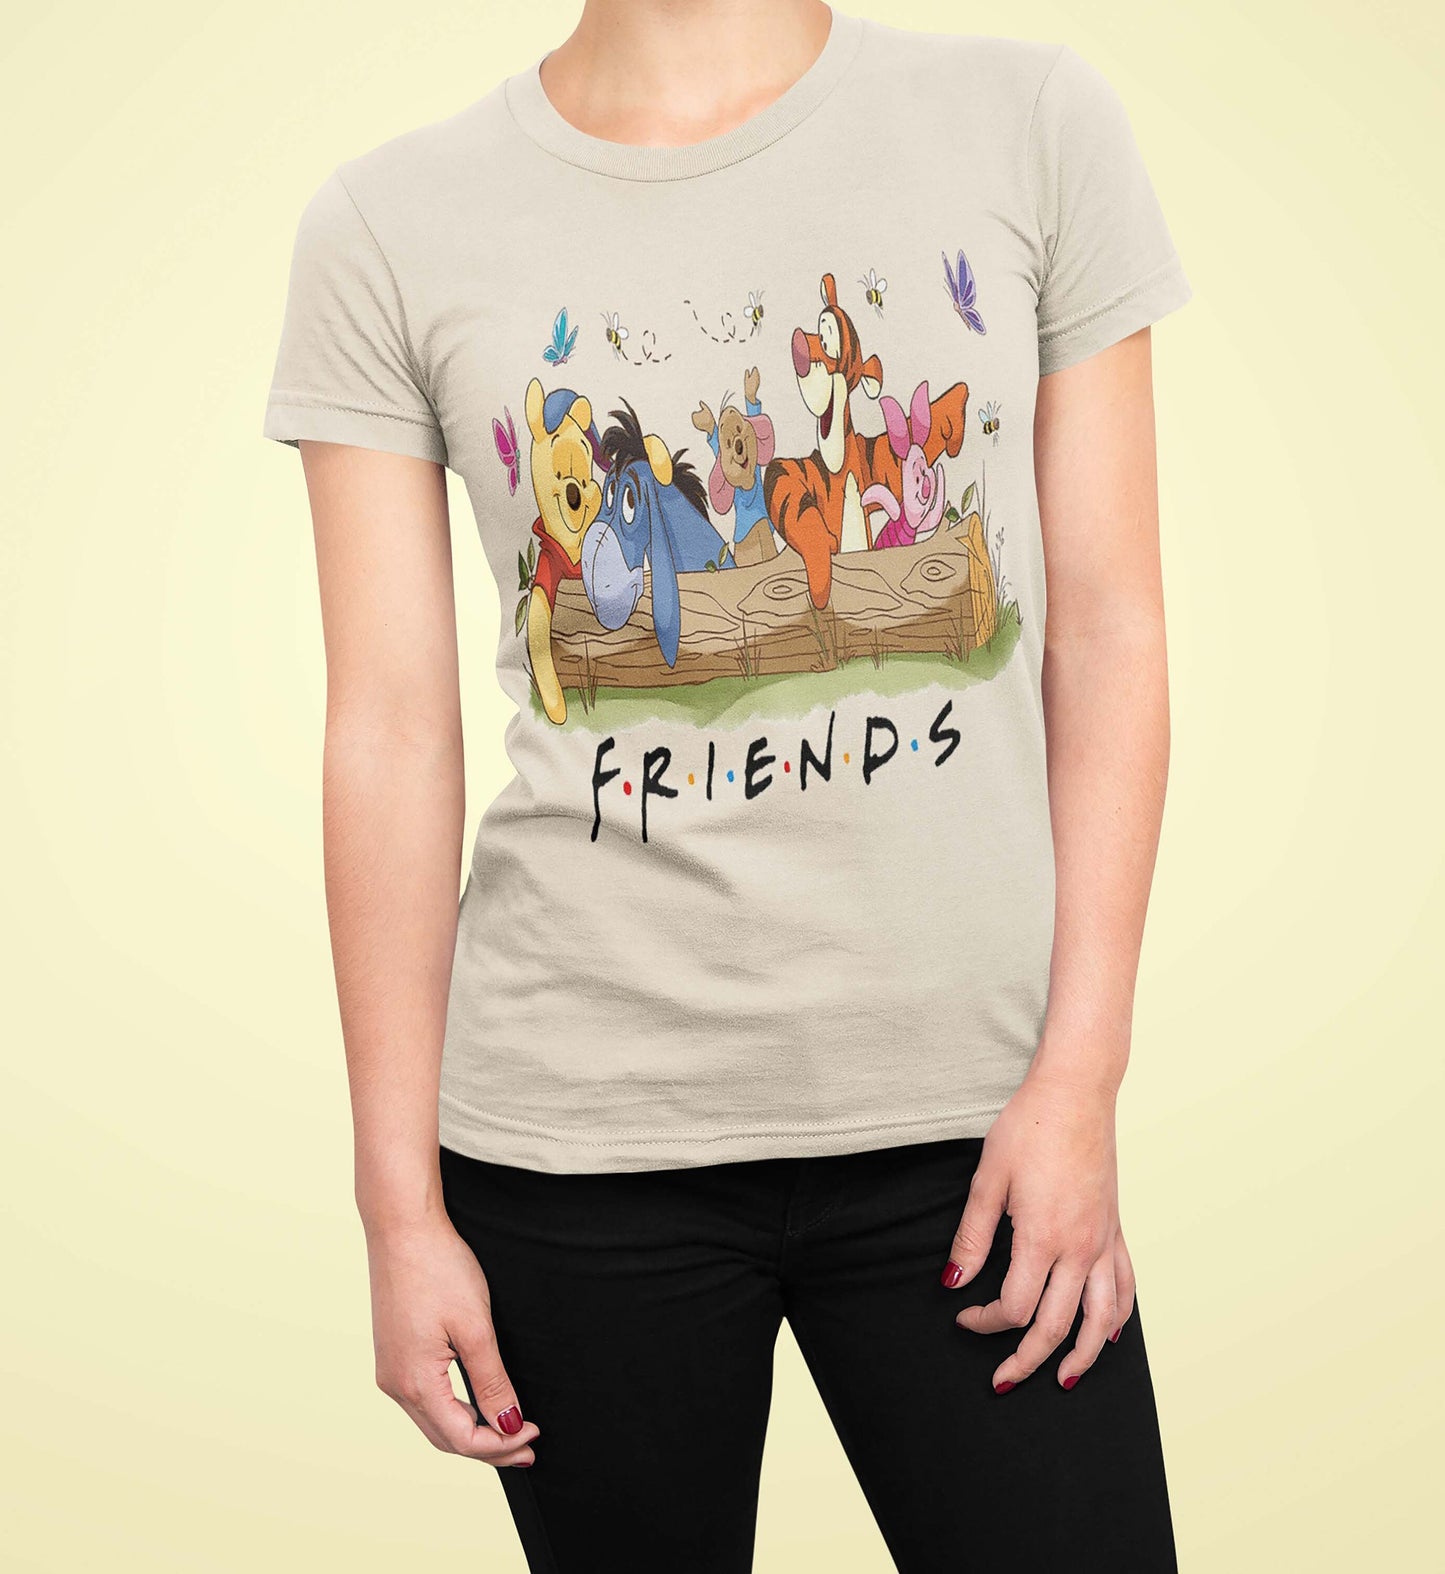 The Perfect Shirt for Winnie the Pooh and Friends Fans